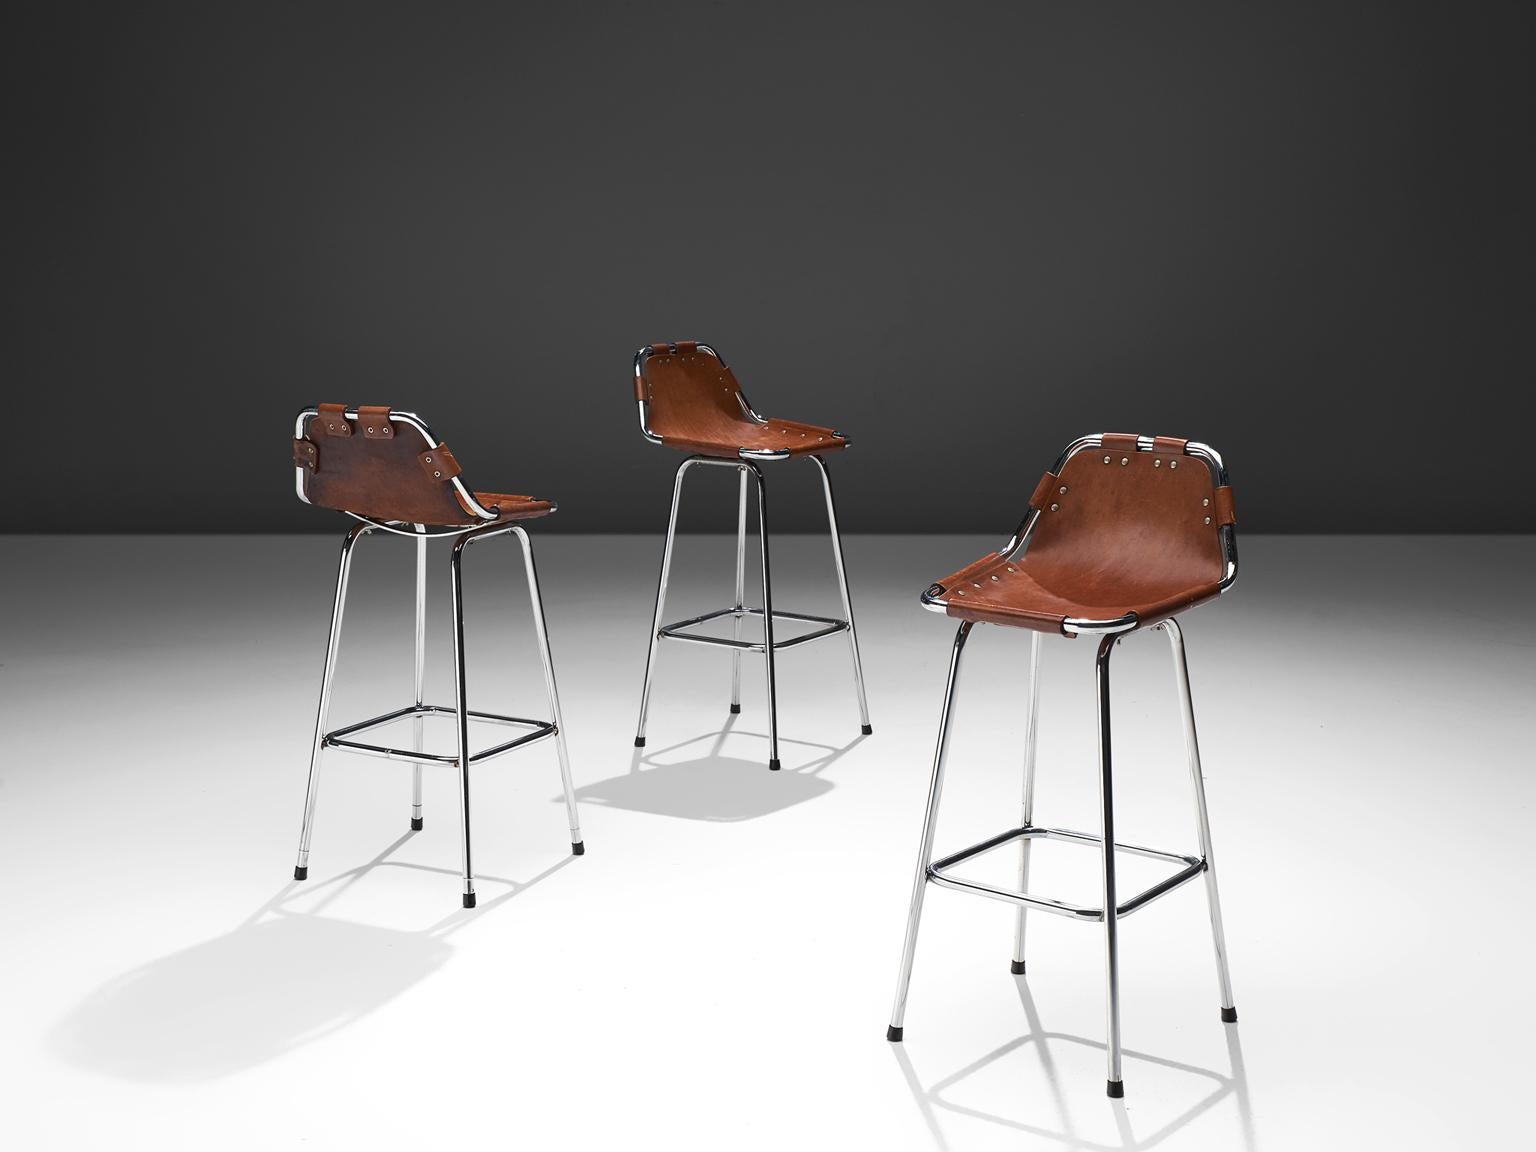 Set of three bar stools, in steel and leather by Charlotte Perriand, France, circa 1970s. 

Set of three stools of the famous model 'Les Arcs' by French architect and designer Charlotte Perriand. The simplistic design consist of a tubular steel